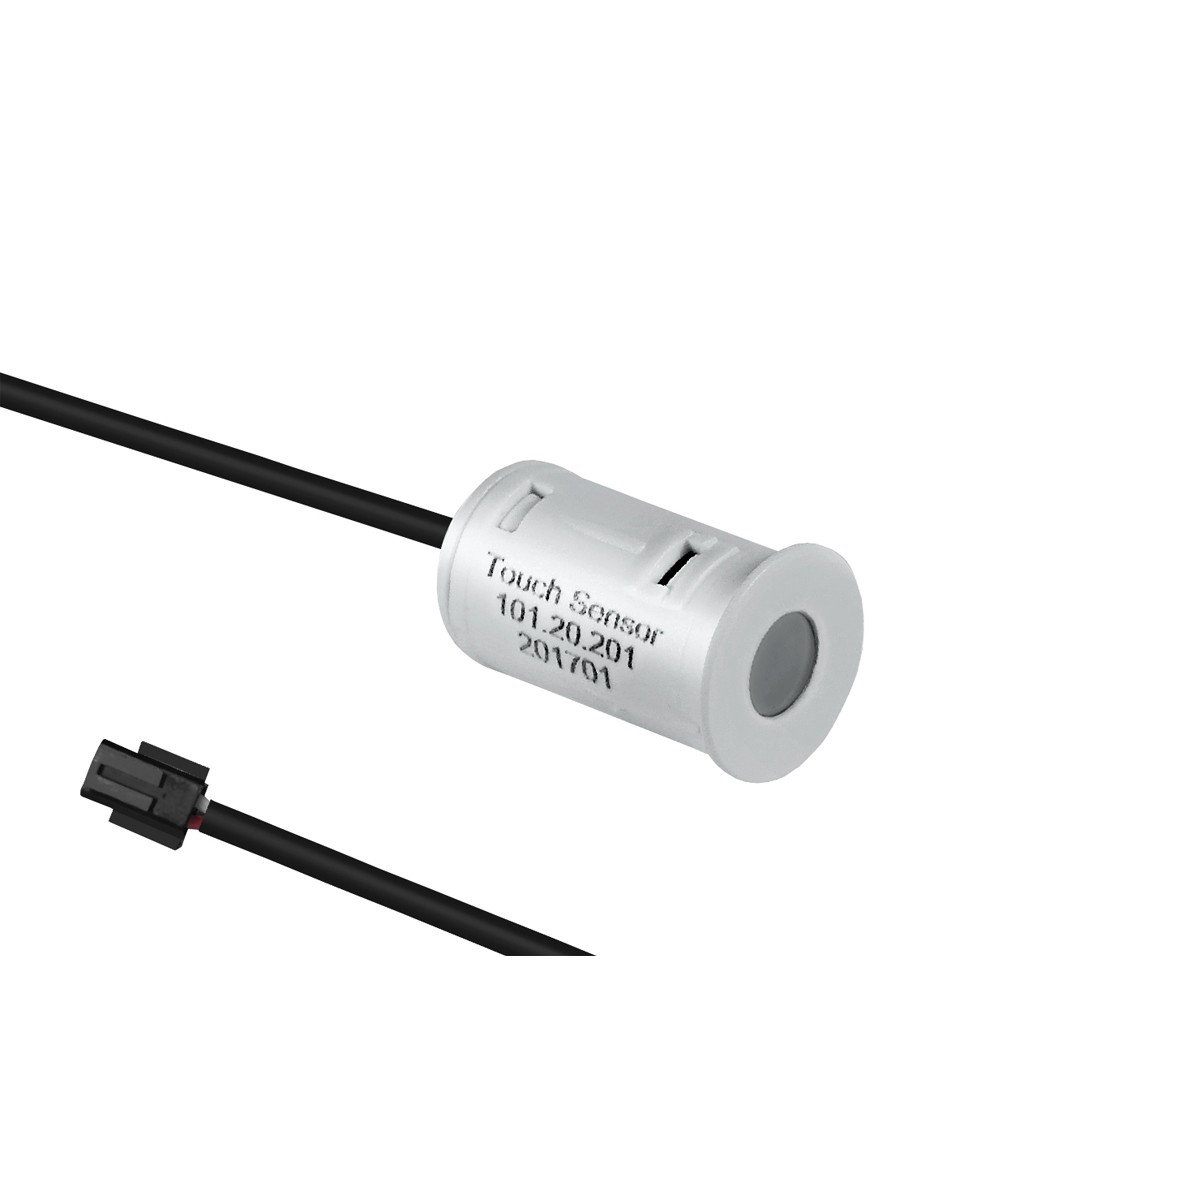 Touch dimming wiring sensor-cylindrical